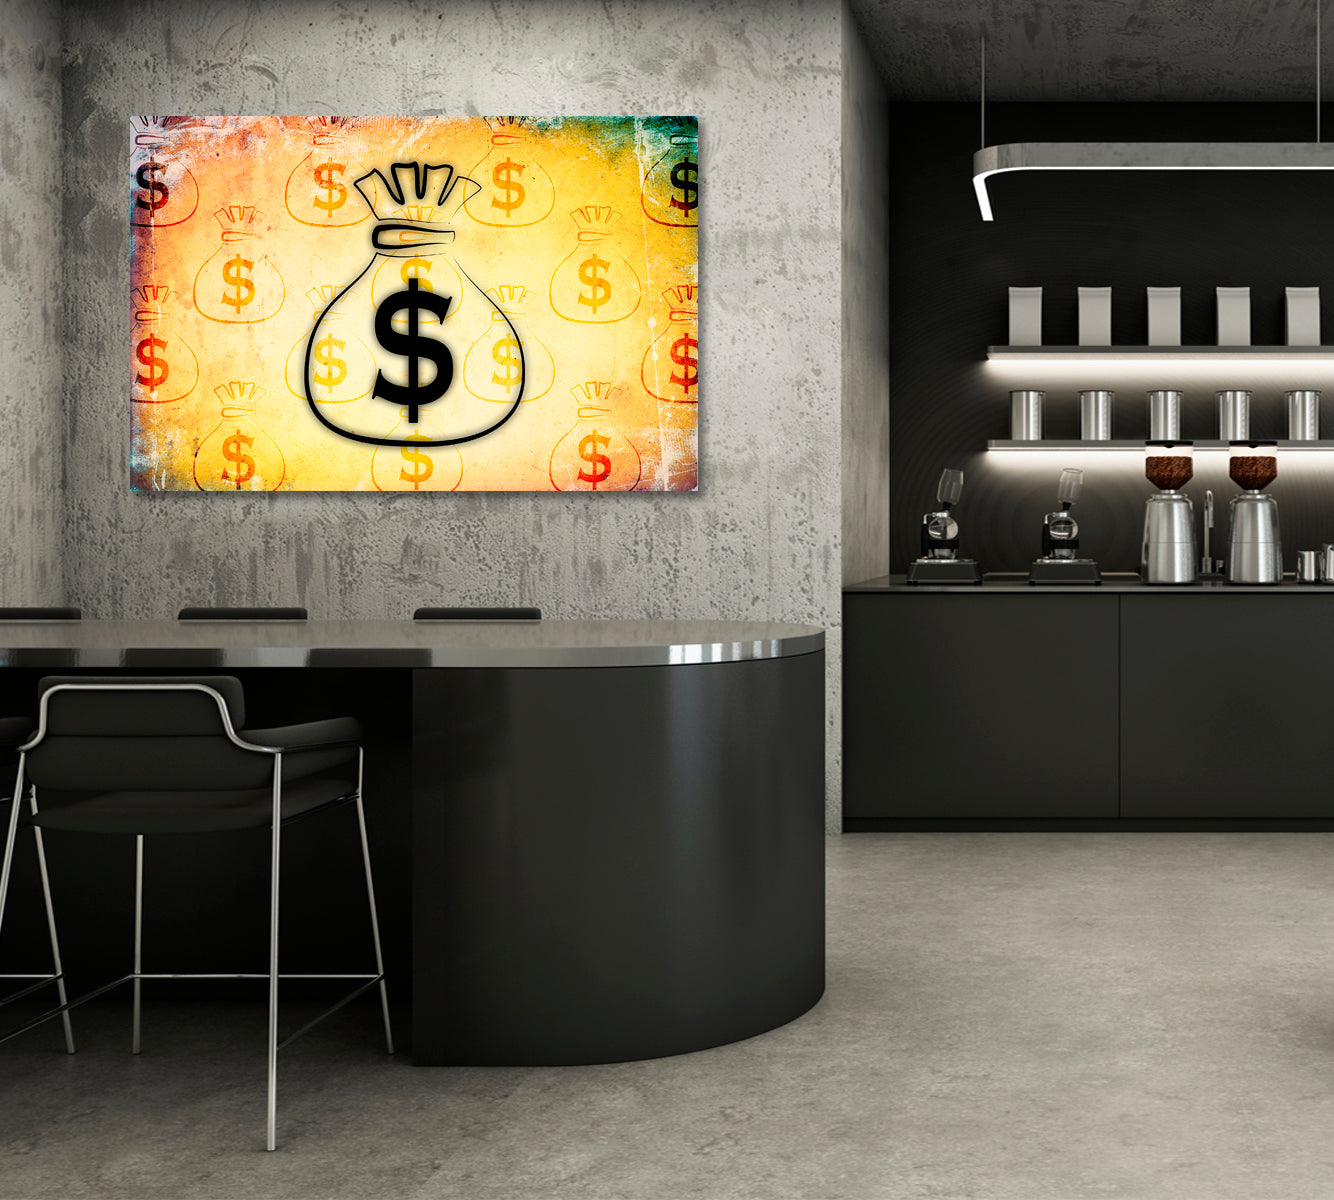 DOLLAR ICON Money Bag Business Fortune Business Concept Wall Art Artesty   